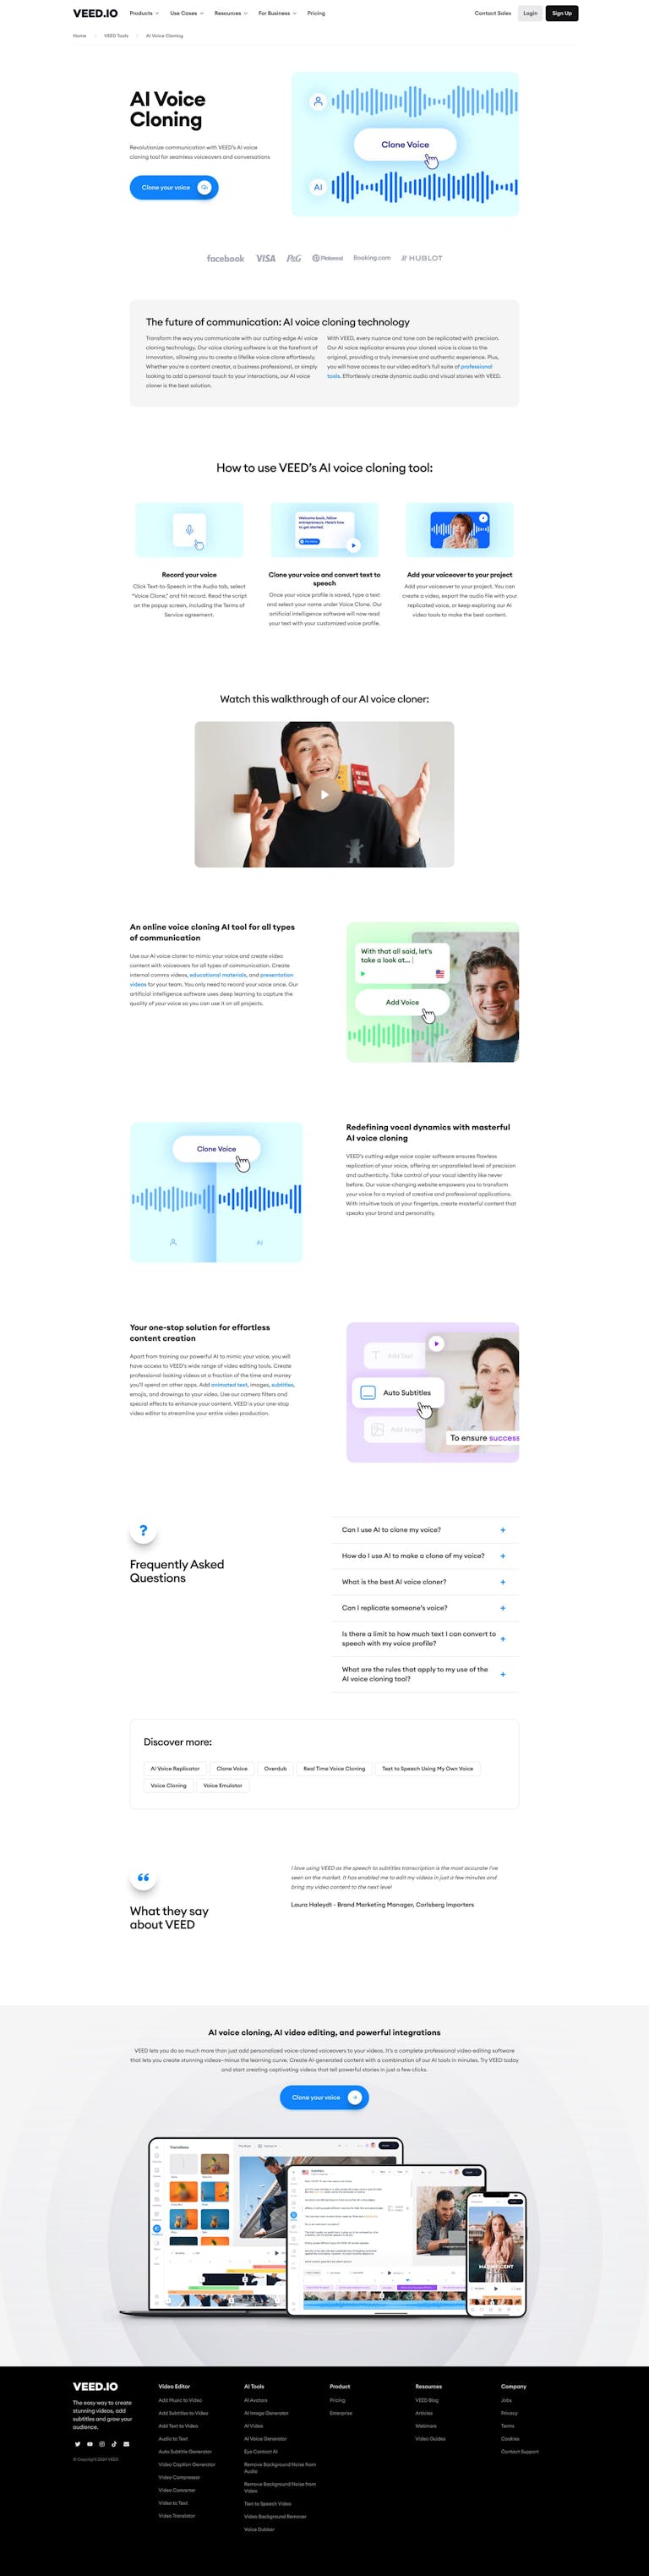 Screenshot of AI Voice Cloning by VEED.IO